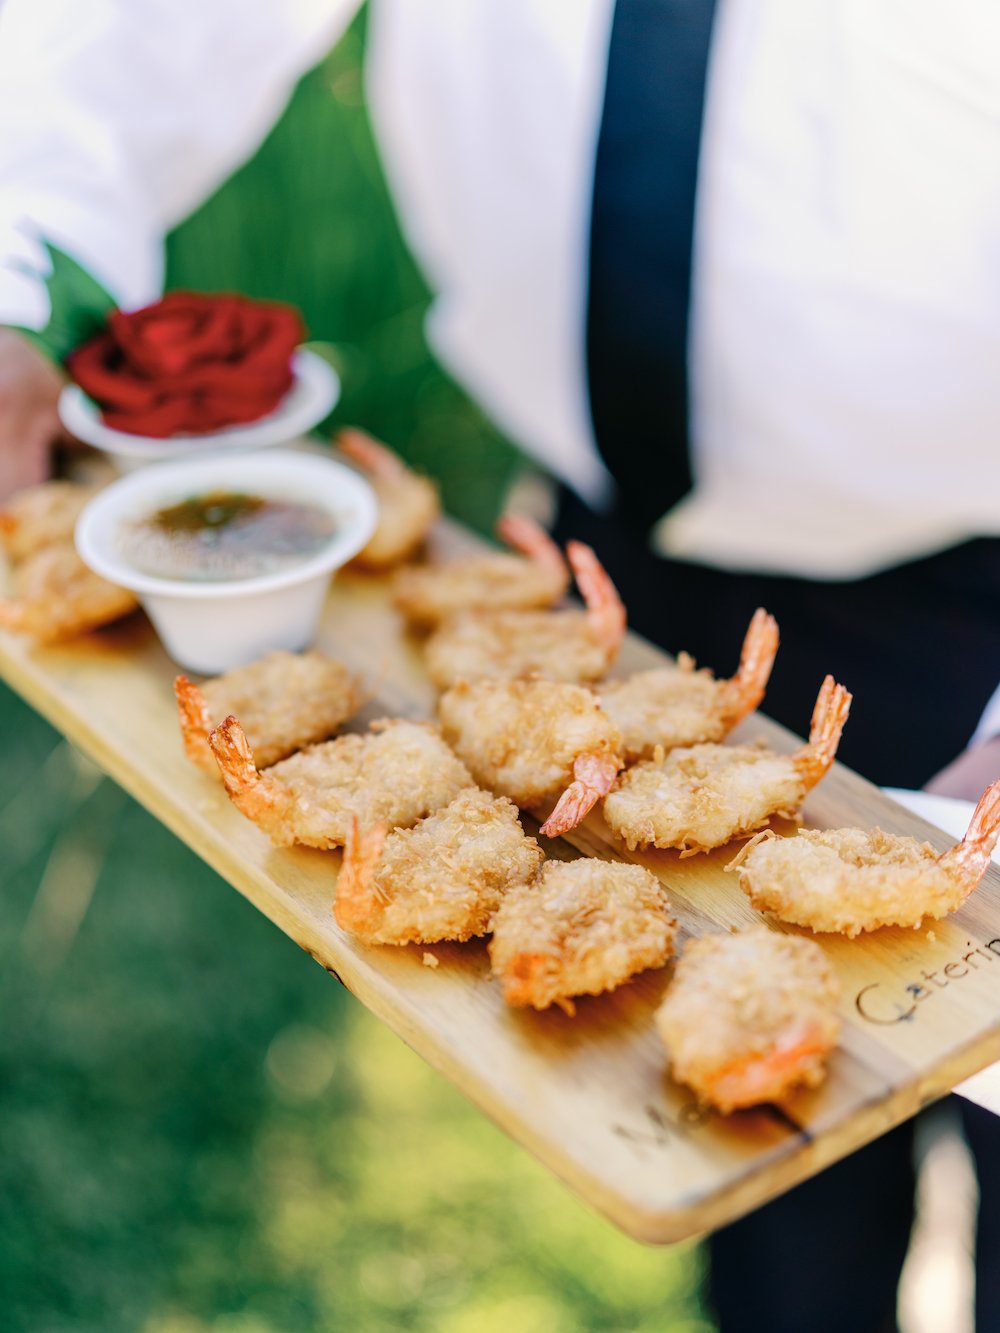 Coconut shrimp catering by Monrose Catering.